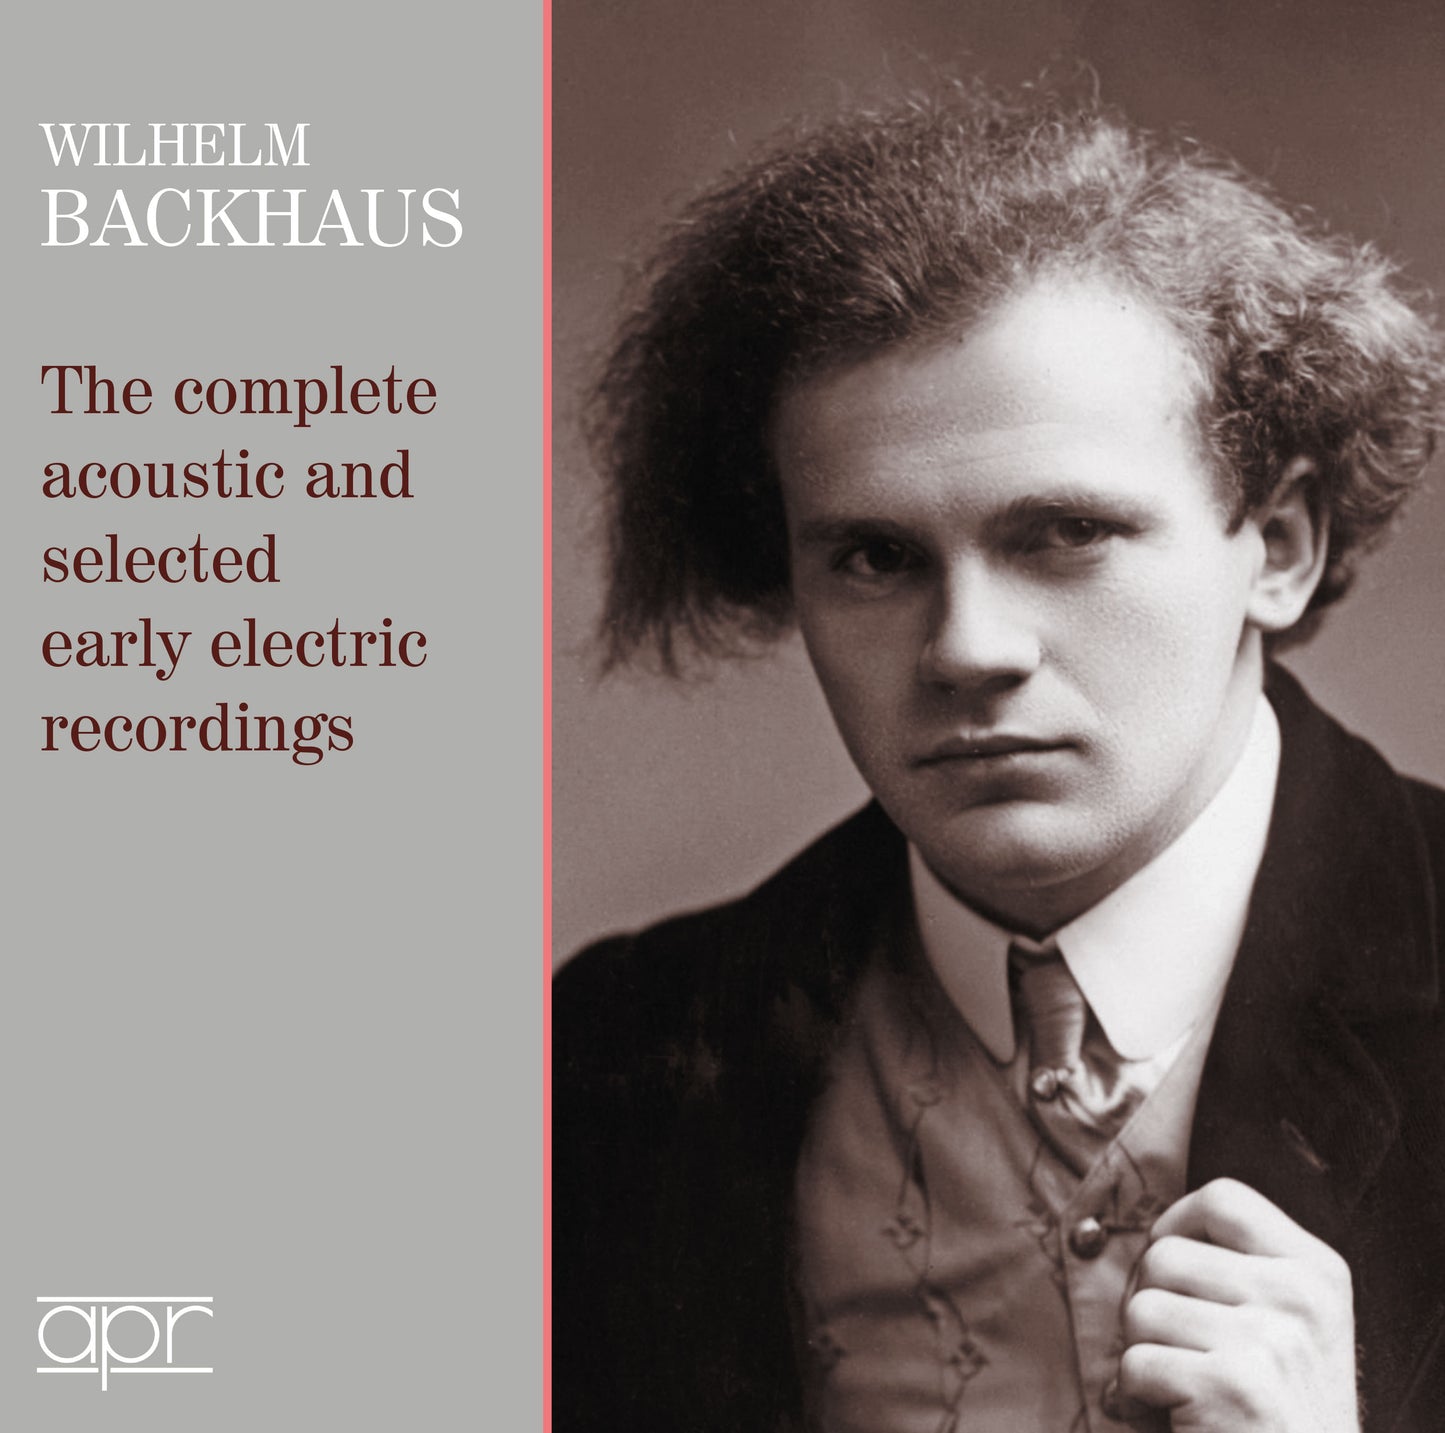 Wilhelm Backhaus - The Complete Acoustic & Selected Early El  Wilhelm Backhaus, New Symphony Orchestra, Royal Albert Hall Orchestra